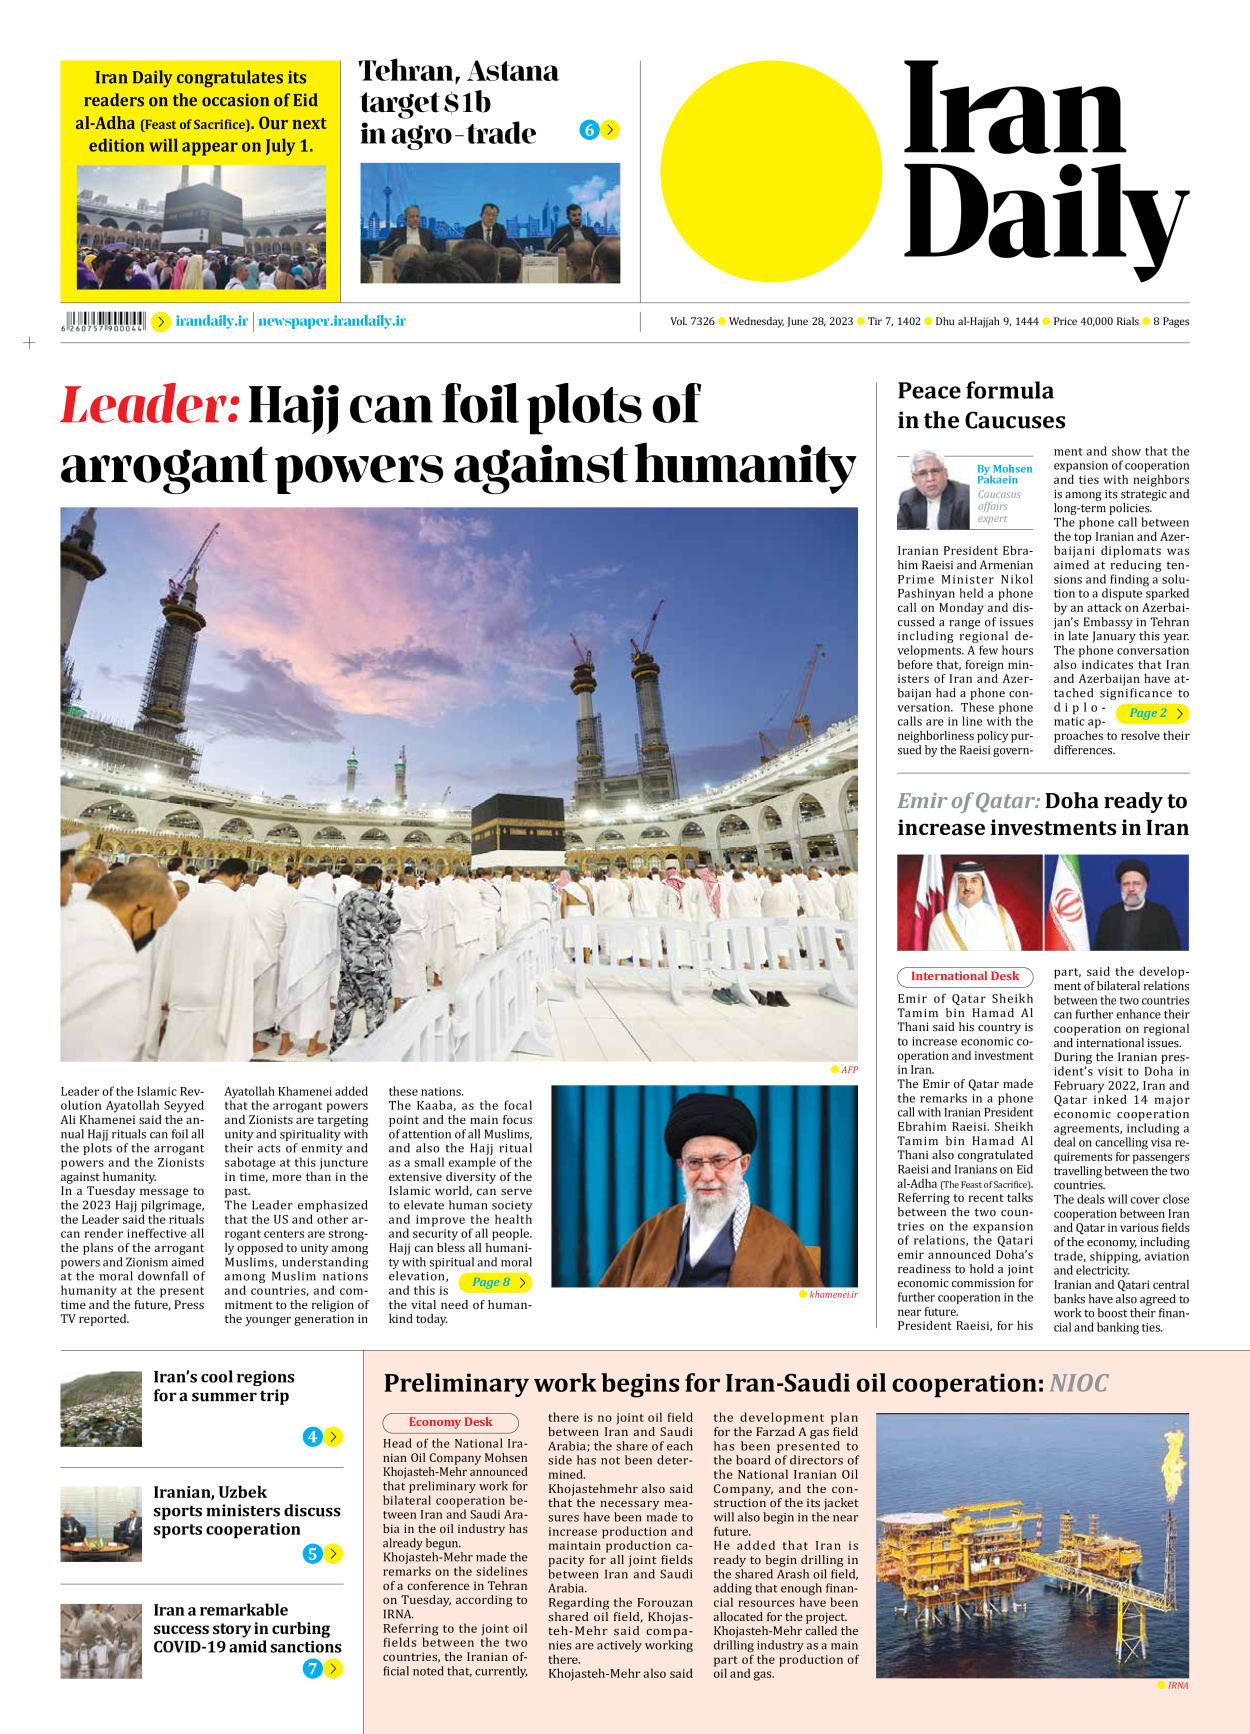 Iran Daily - Number Seven Thousand Three Hundred and Twenty Six - 28 June 2023